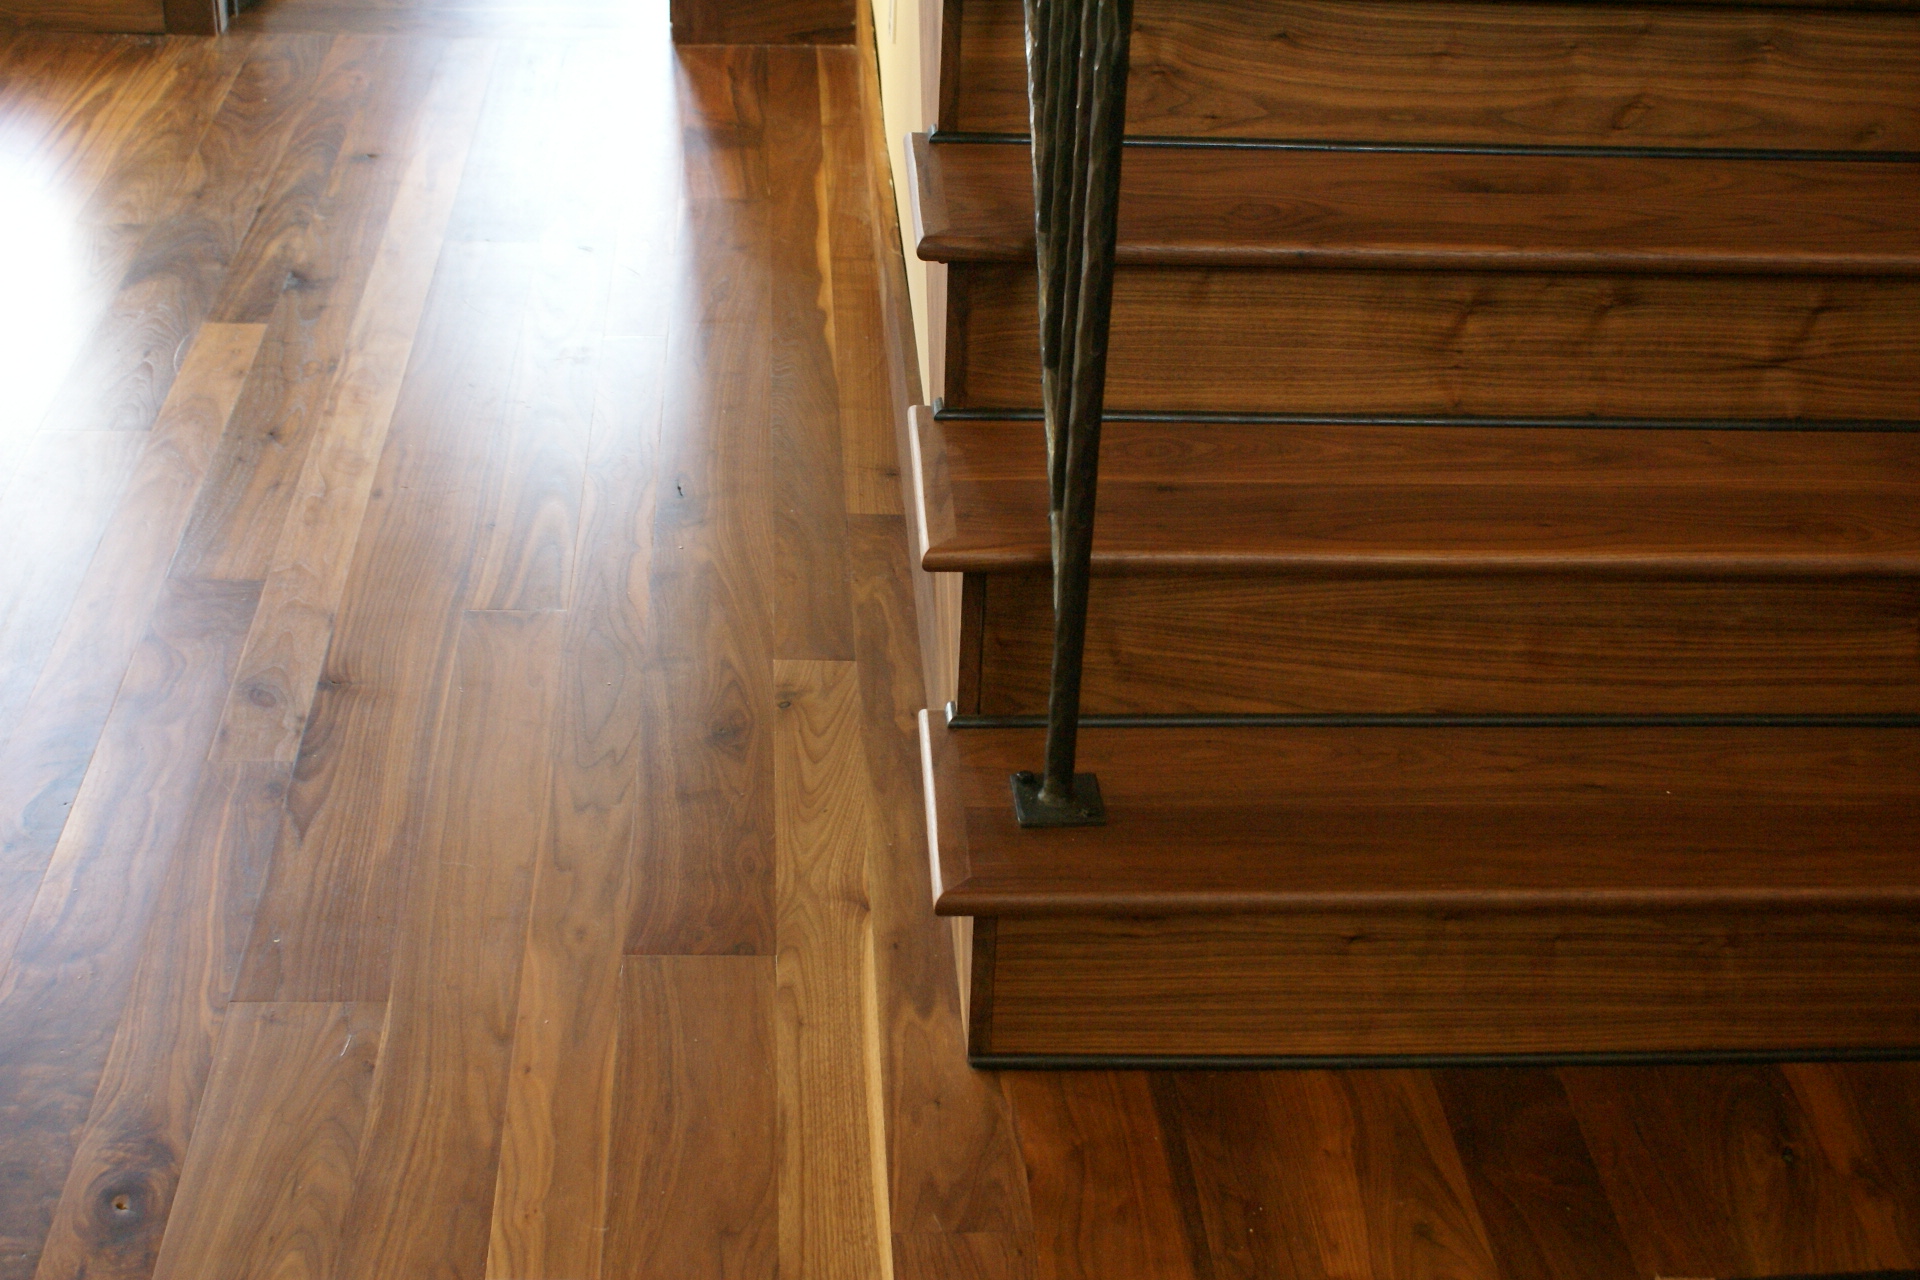 Pre-Finished Hardwood Flooring - Stair Treads and Handrails to Match